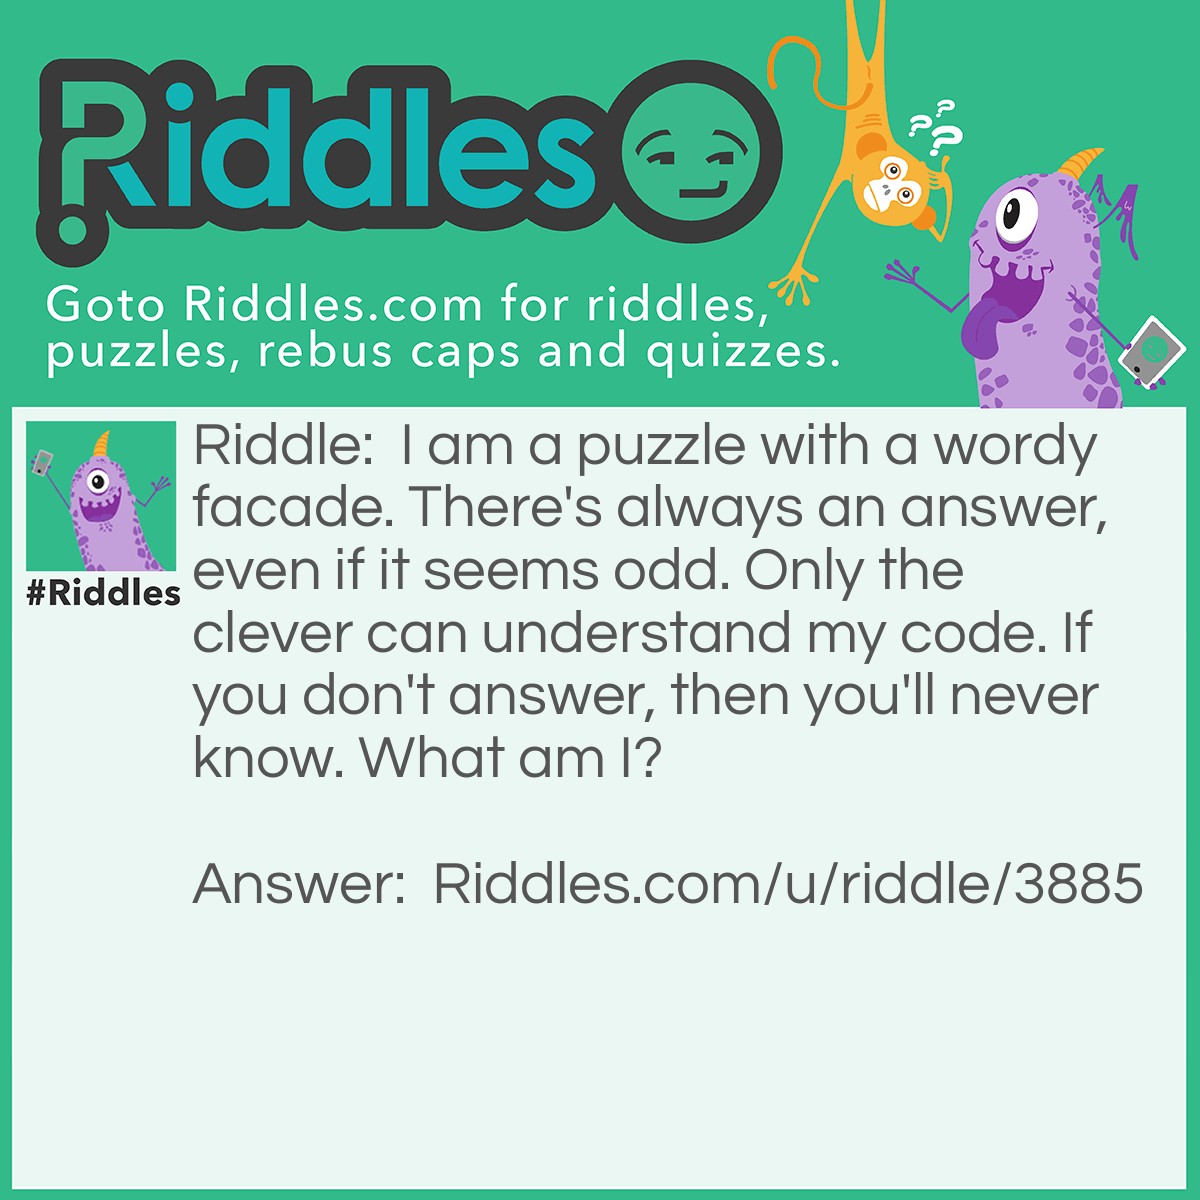 Riddle: I am a puzzle with a wordy facade. There's always an answer, even if it seems odd. Only the clever can understand my code. If you don't answer, then you'll never know. What am I? Answer: A riddle.